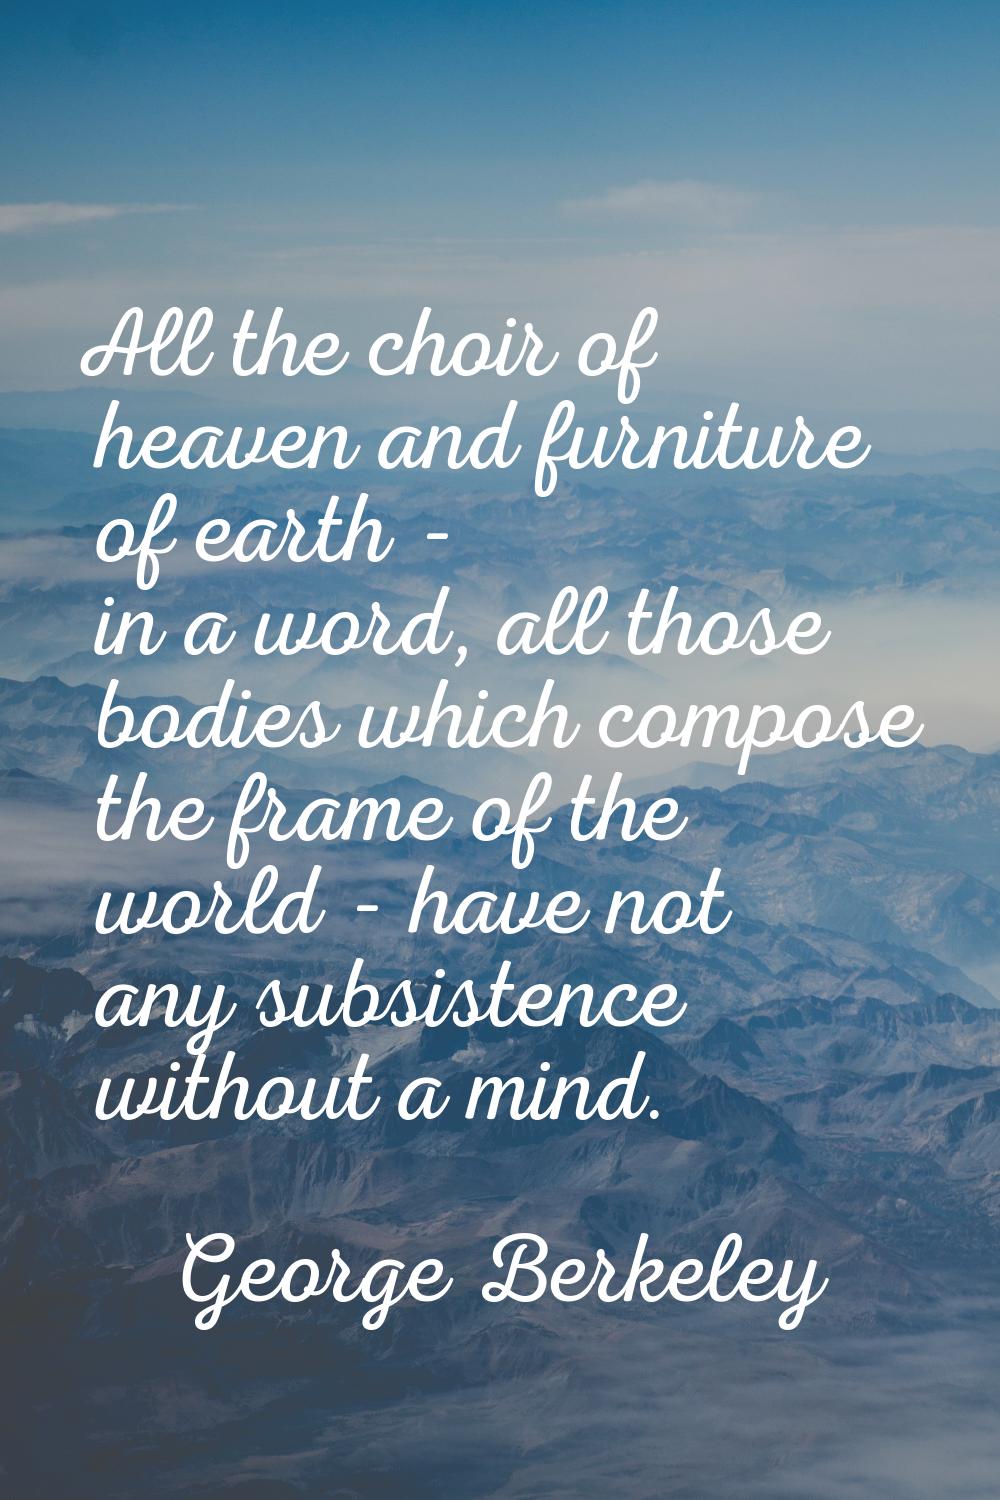 All the choir of heaven and furniture of earth - in a word, all those bodies which compose the fram